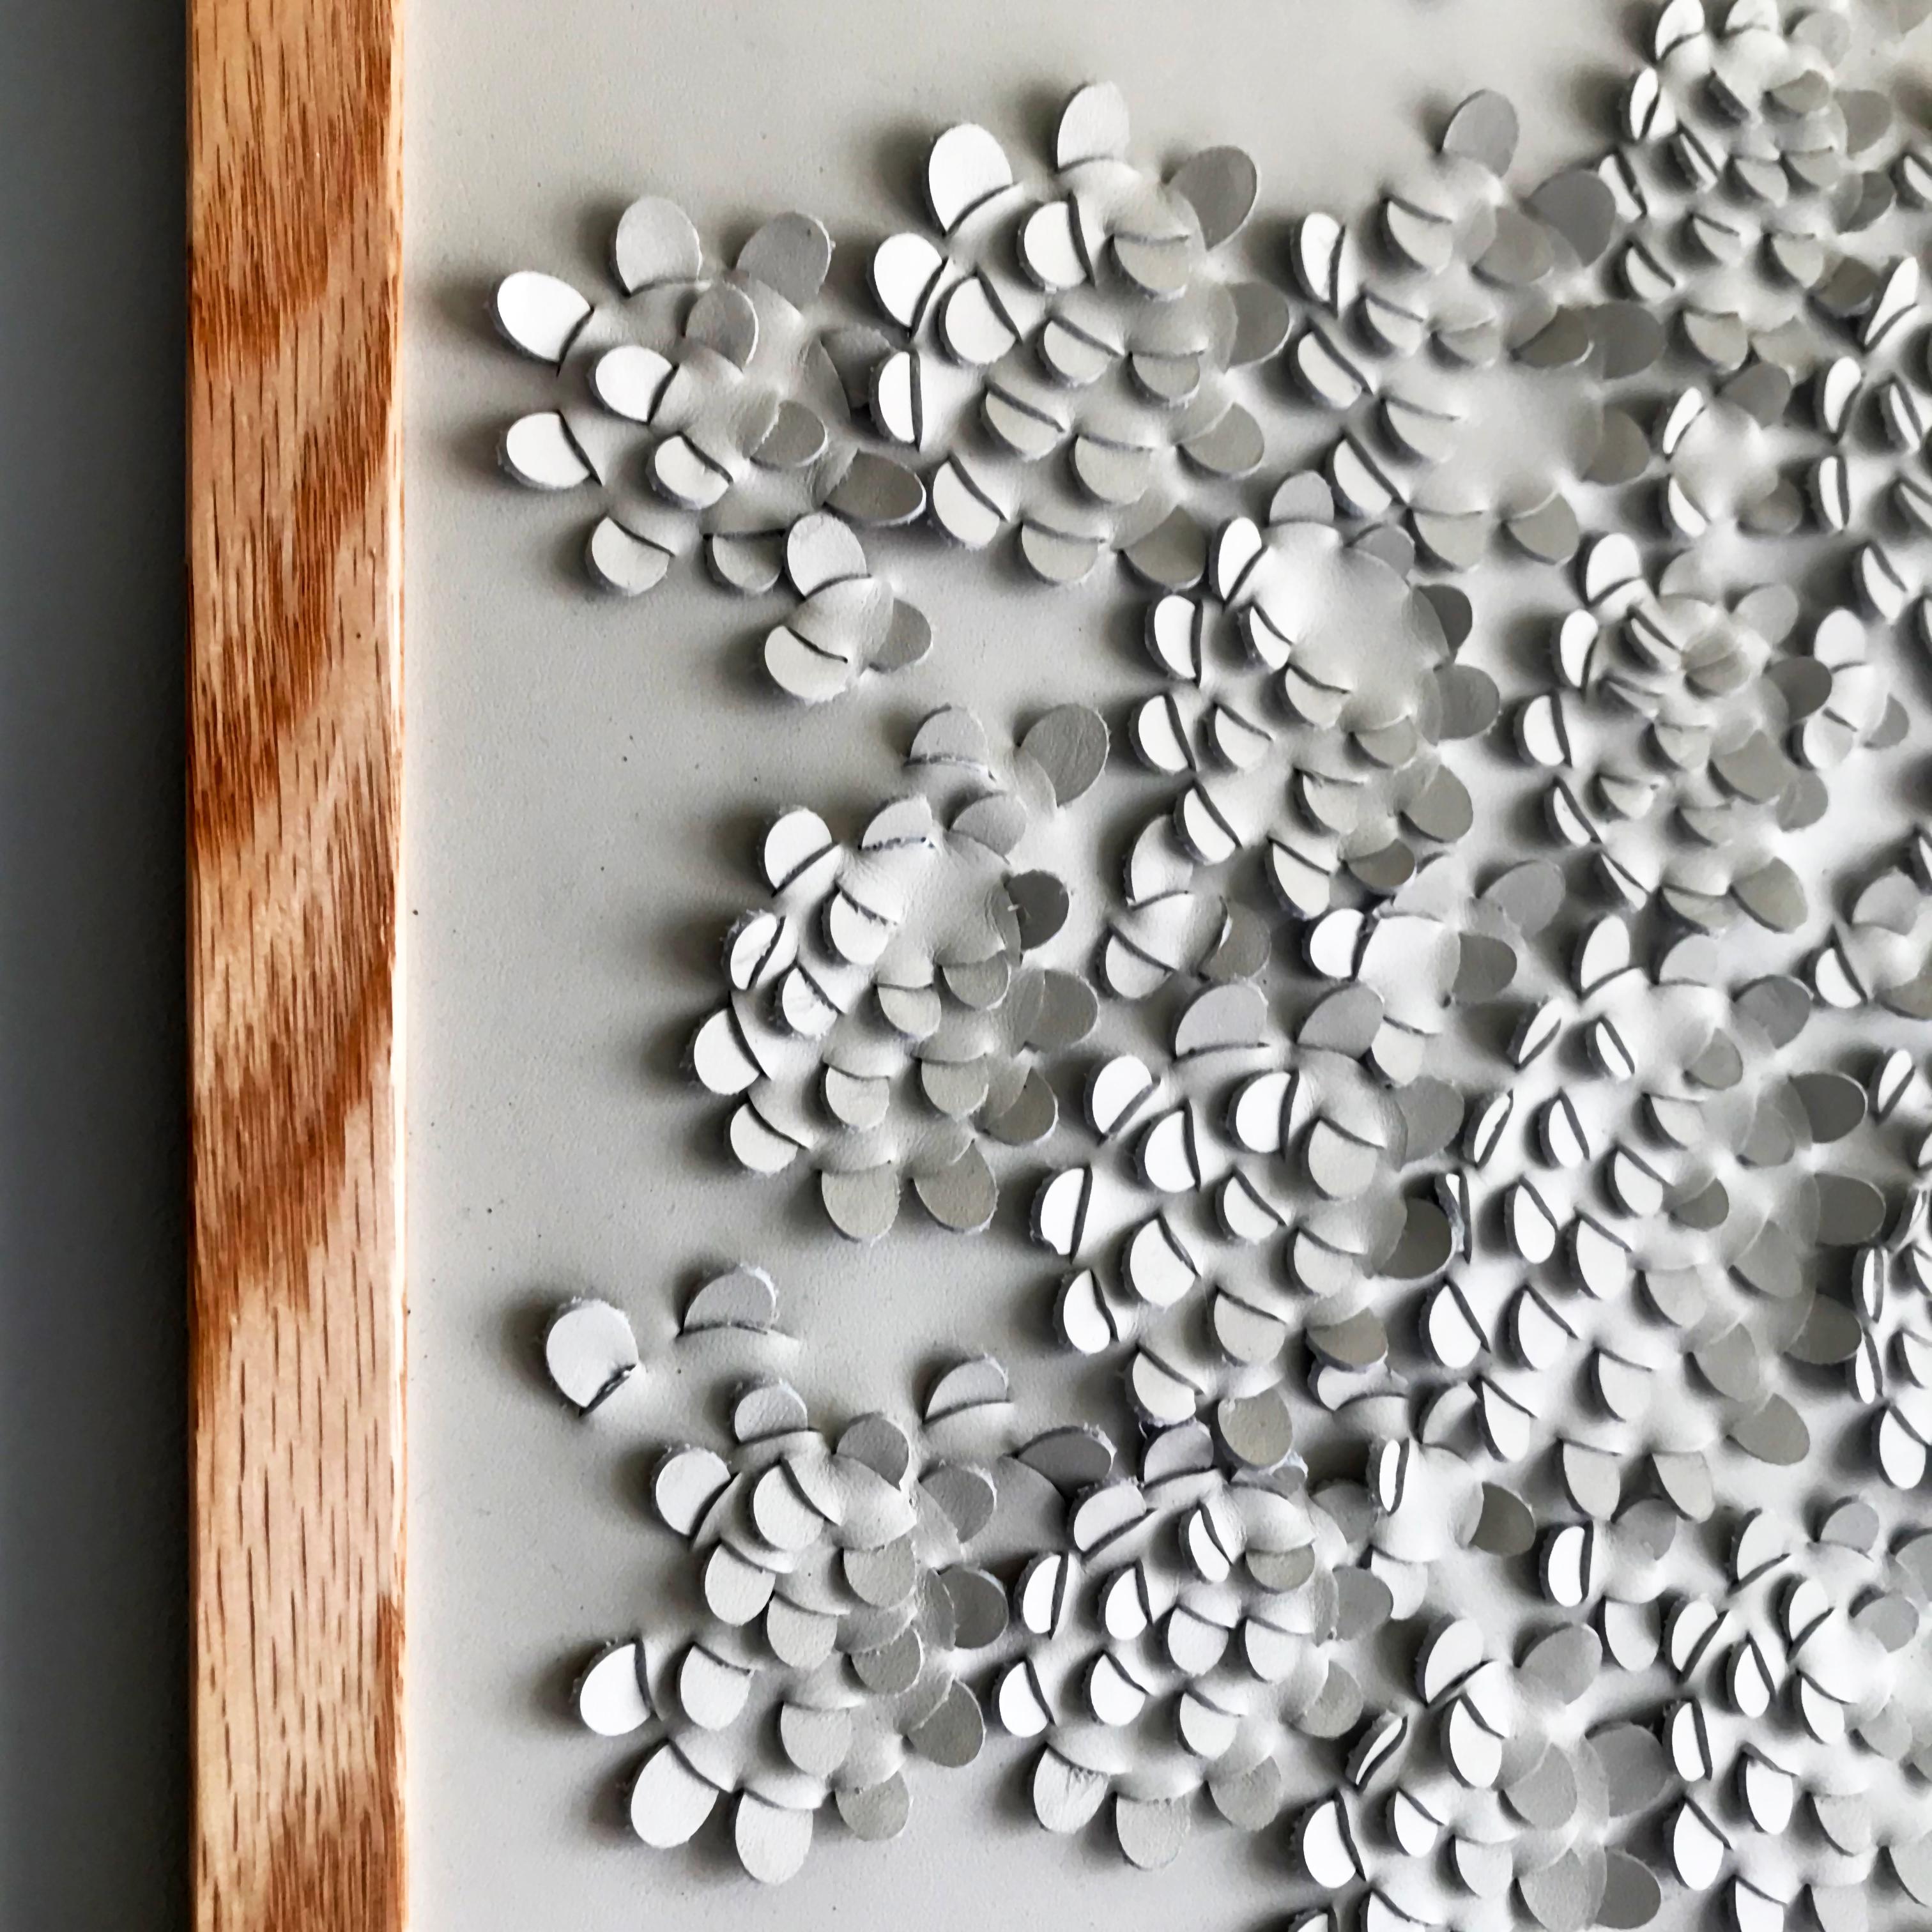 Hand-Crafted Wildflower: A Piece of 3D Sculptural Cream Leather Wall Art For Sale